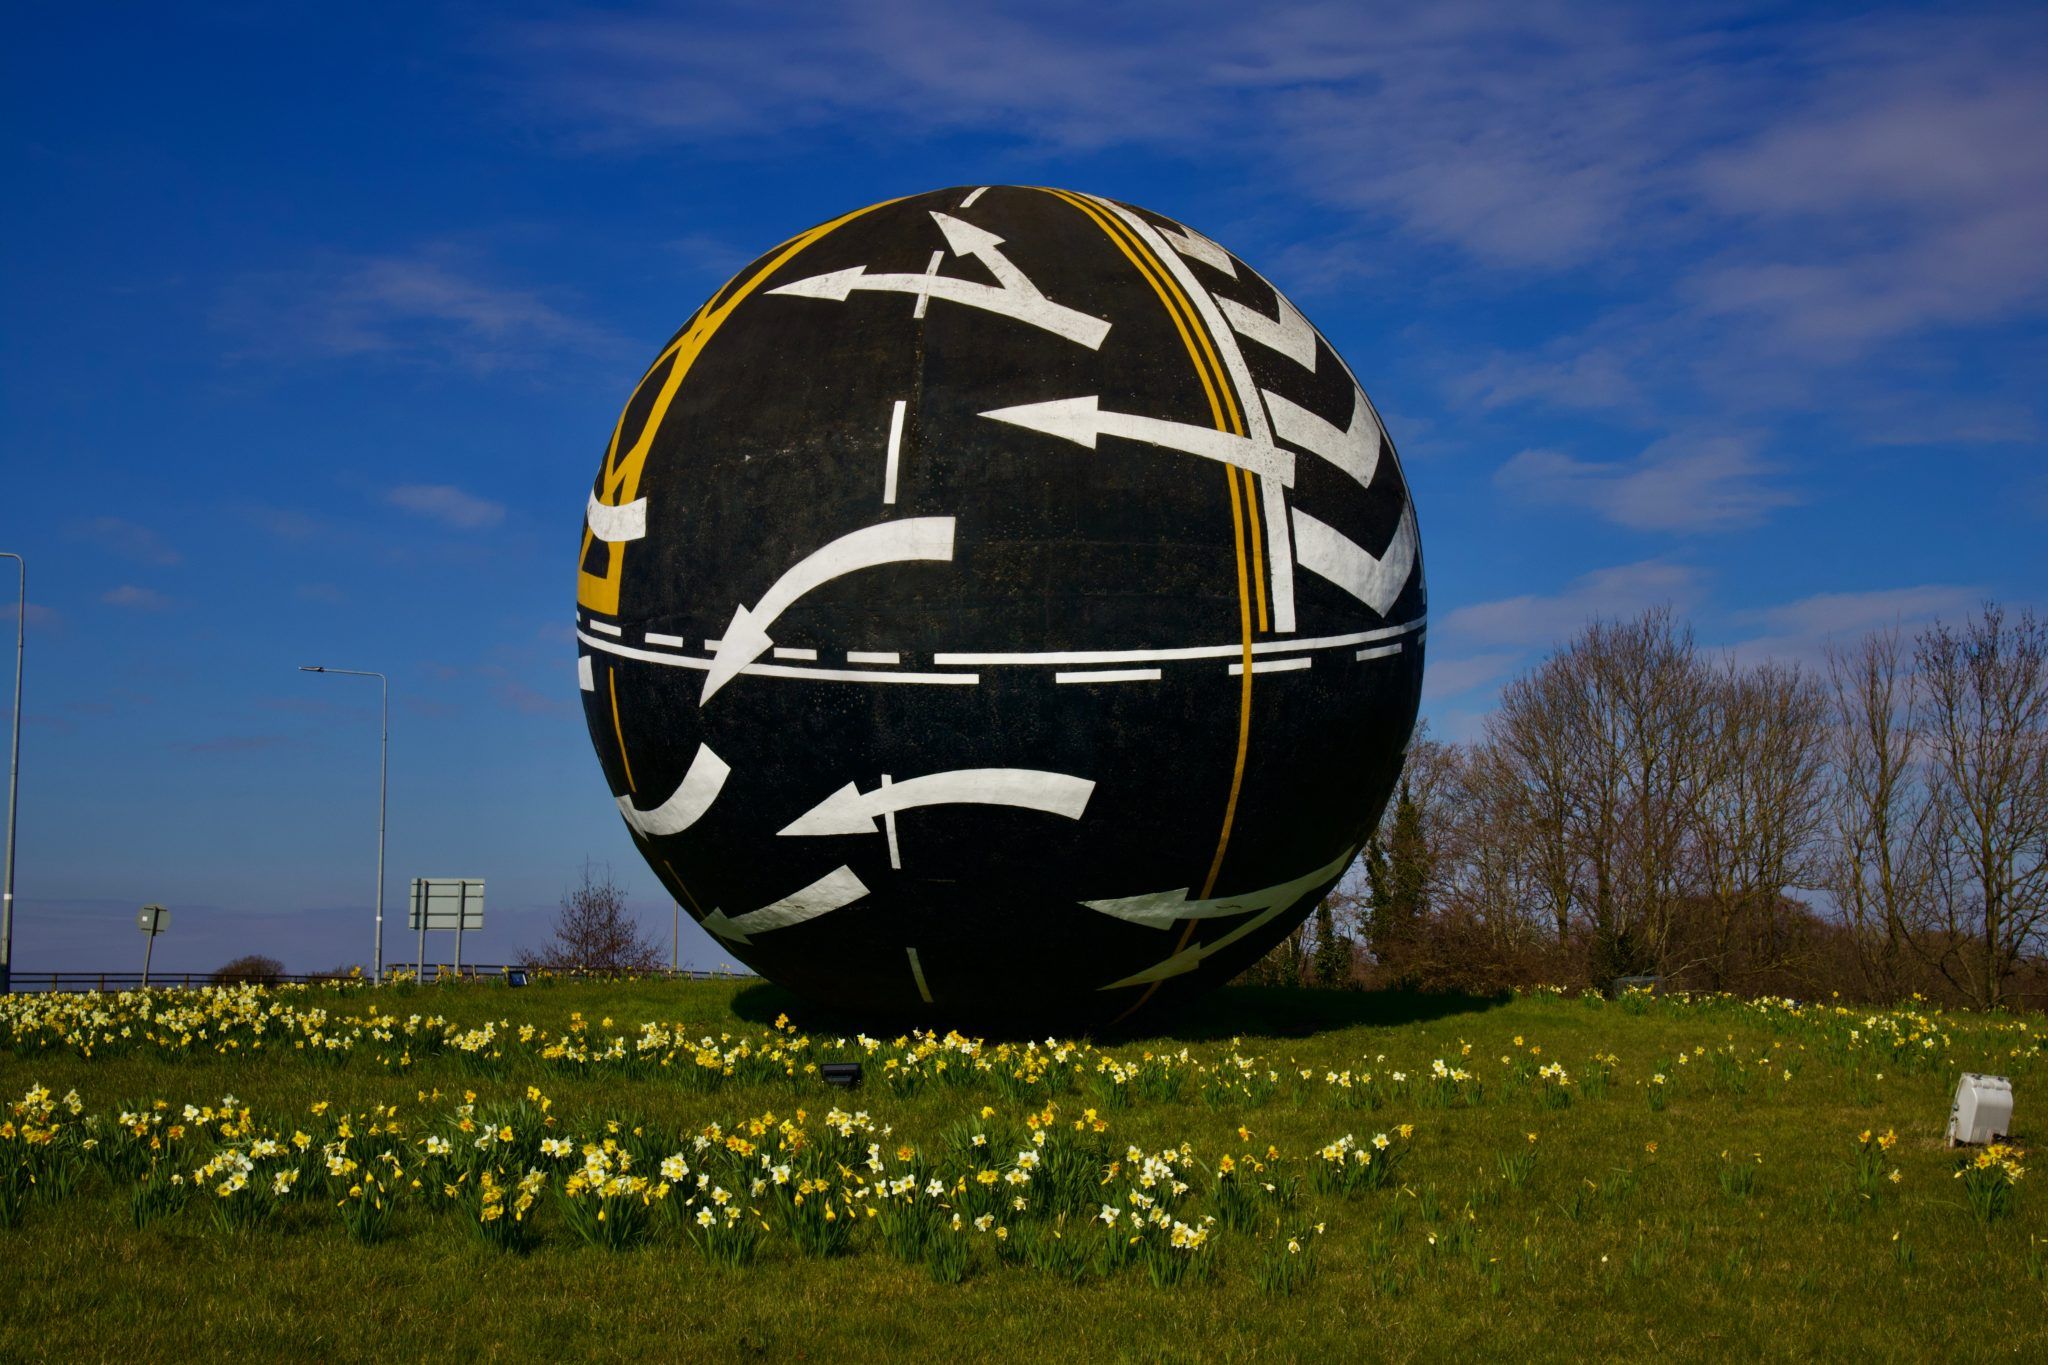 The Naas Ball - a large round statue covered in traffic markings